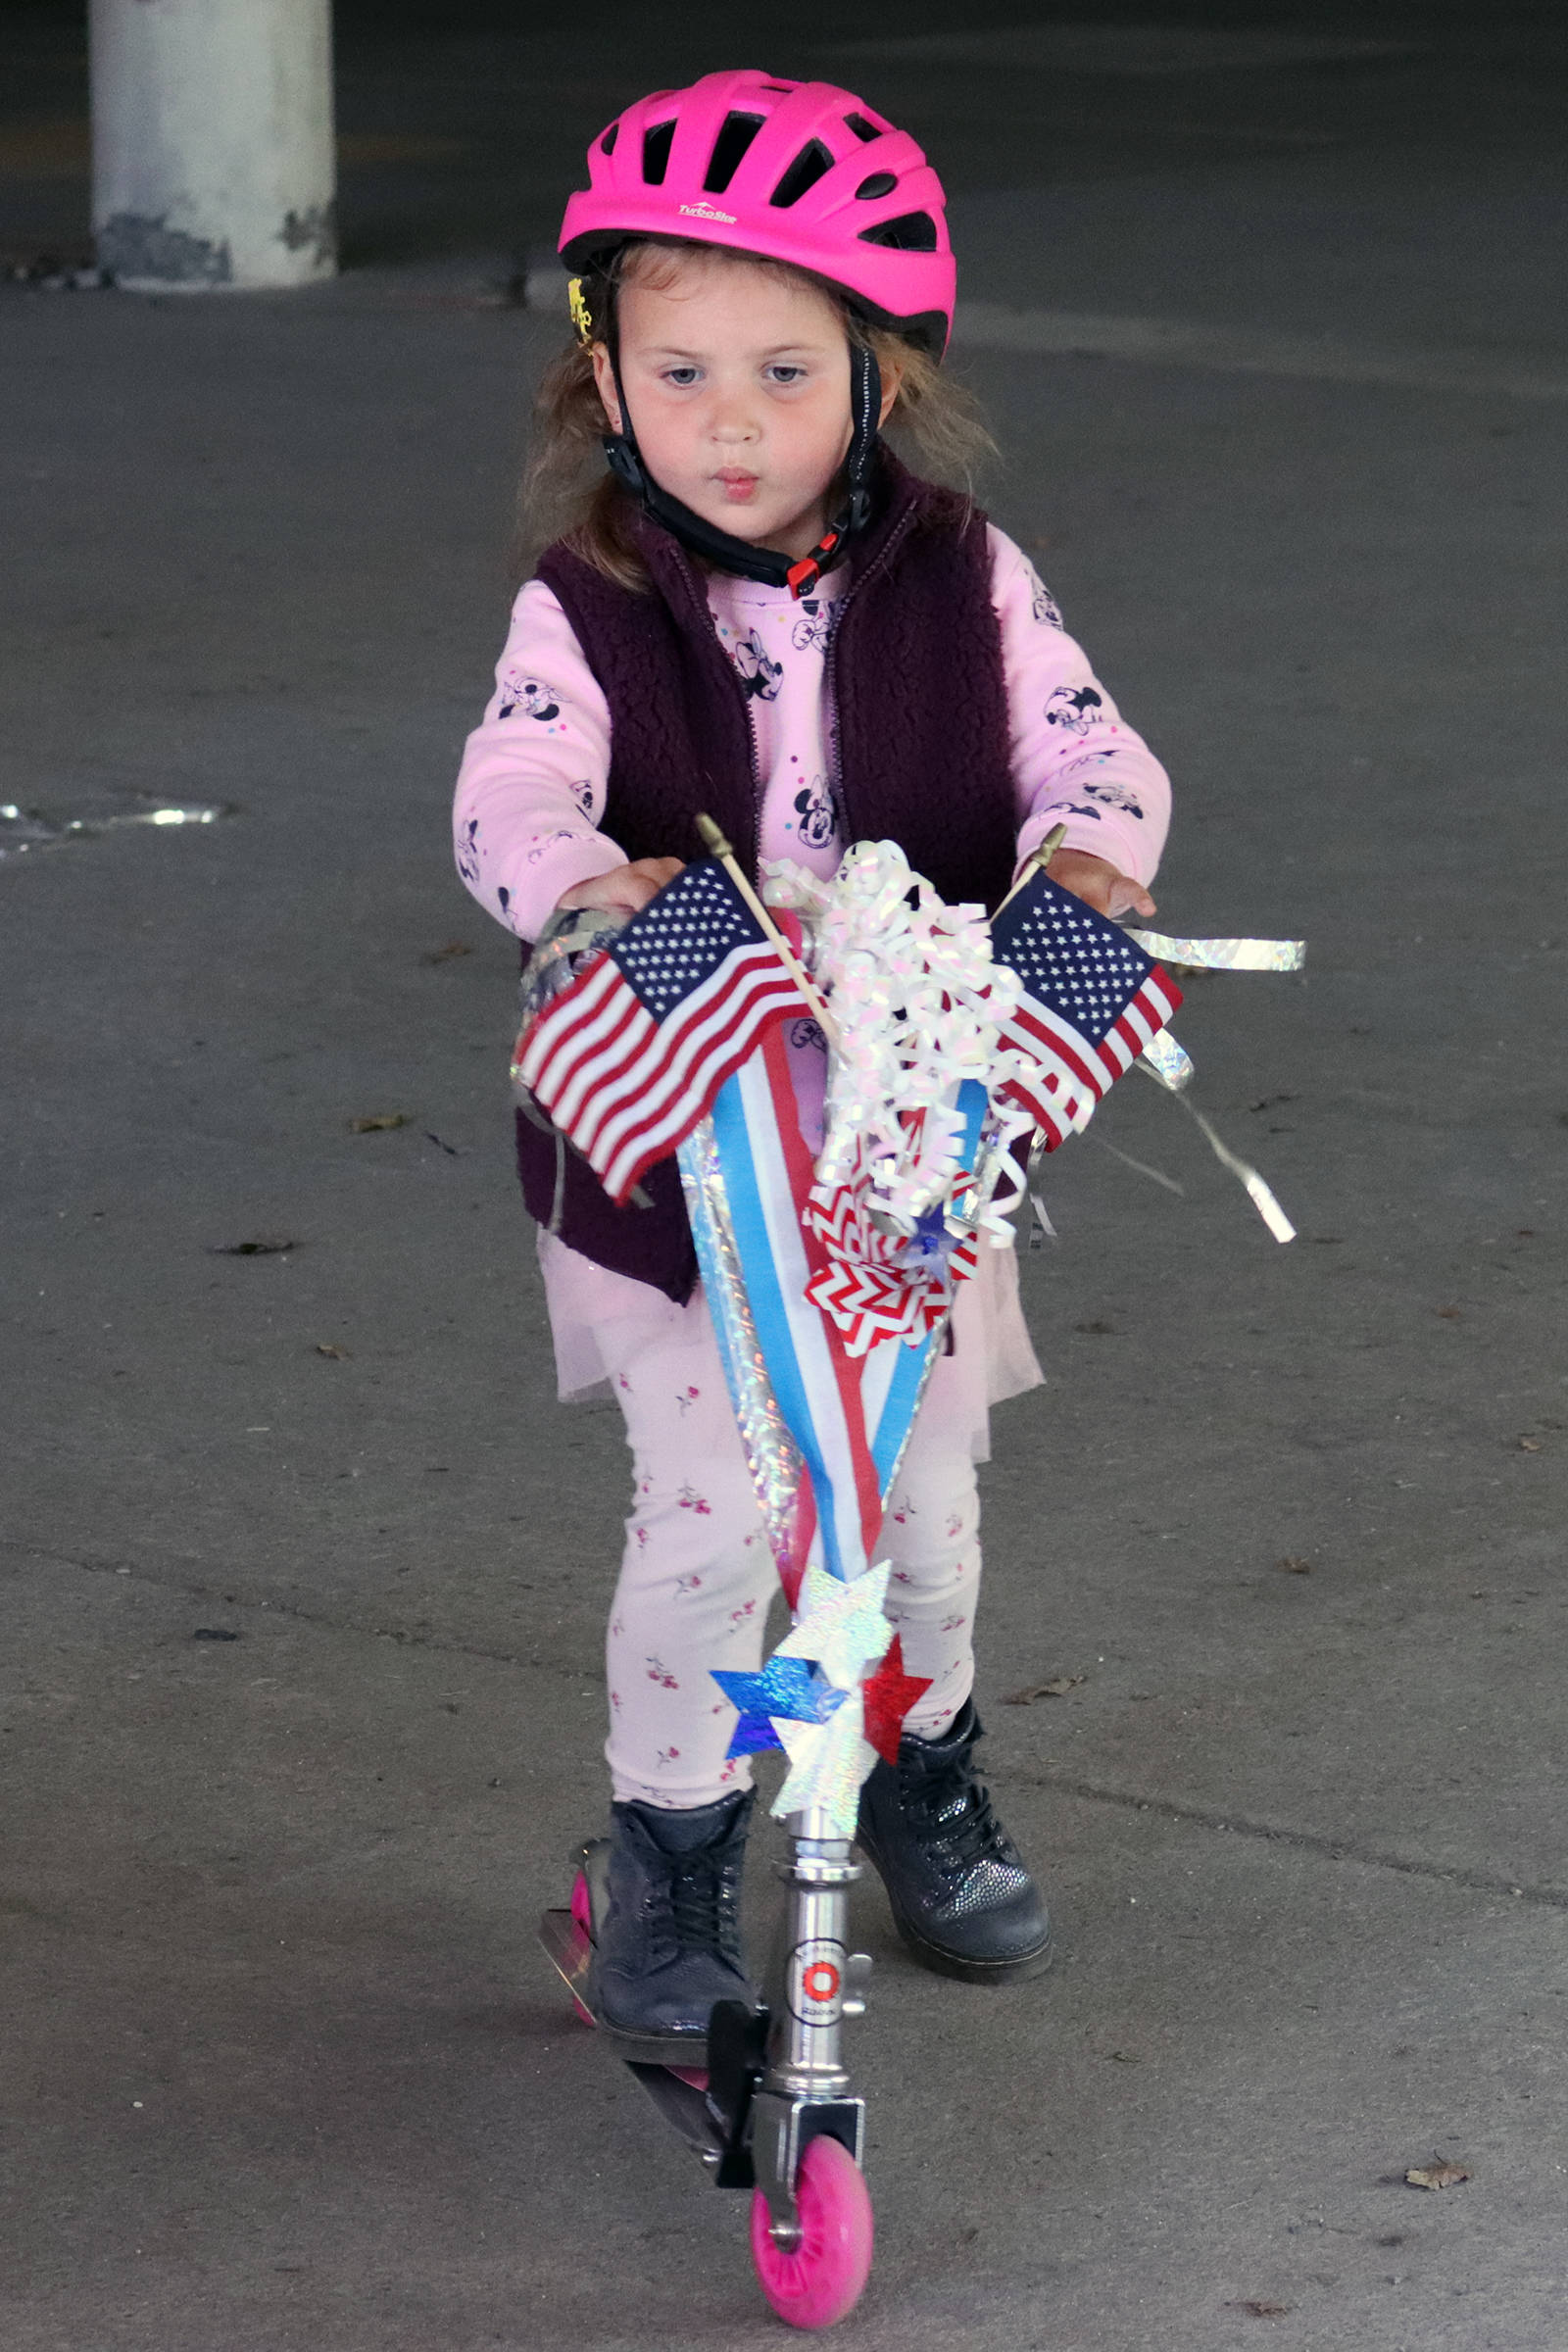 Clara Malueg, 4, scoots around the Douglas Public Library parking garage on Saturday, July 3. While most parents and youths decorated bikes, Mauleg and mom Amy Balagna gave a scooter patriotic flair. (Ben Hohenstatt / Juneau Empire)